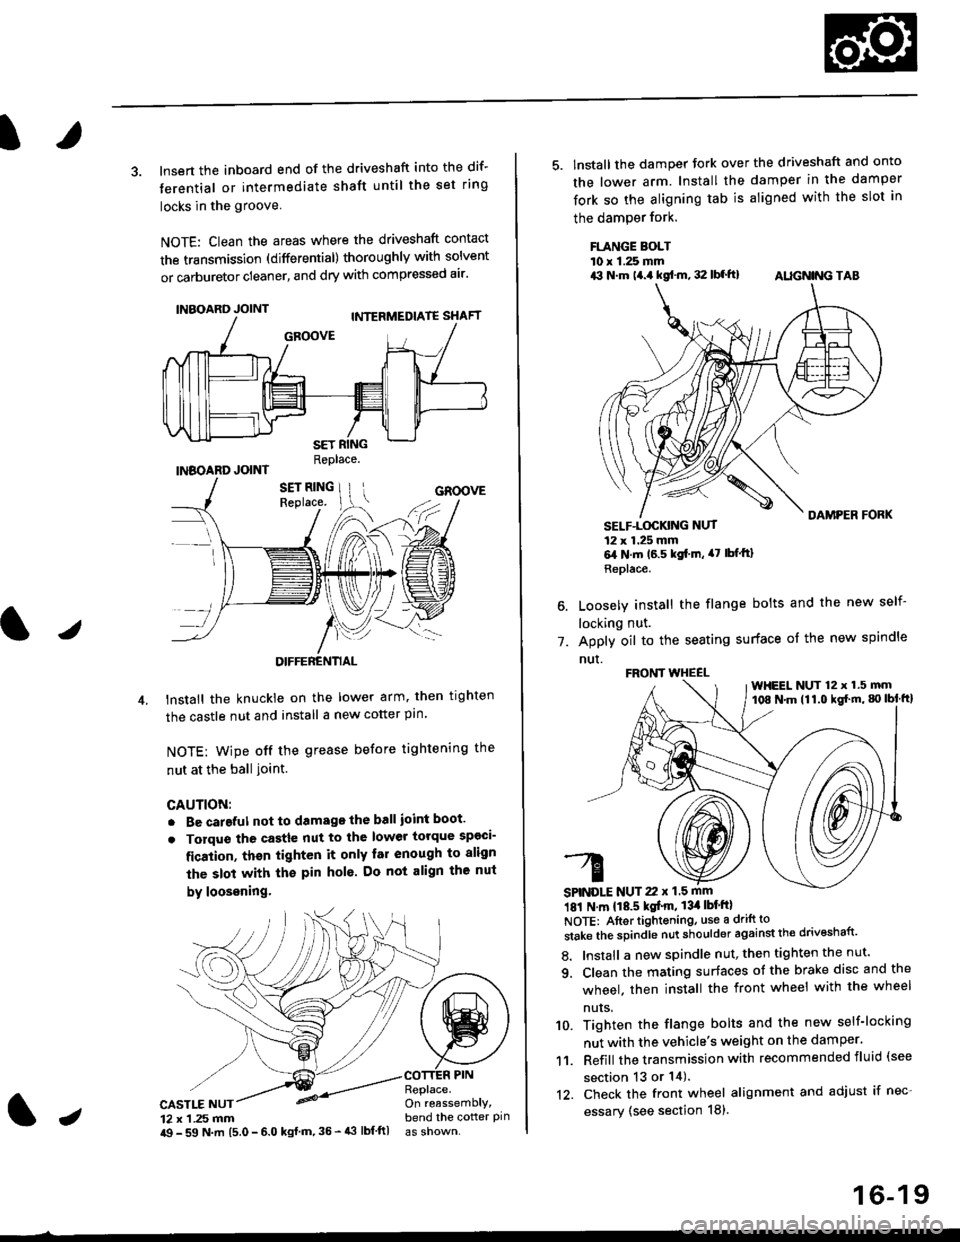 HONDA CIVIC 1999 6.G Workshop Manual 3. lnsert the inboard end of the driveshaft into the dif-
terential or intermediate shaft until the set ring
locks in the groove
NOTE: Clean the areas where the driveshaft contact
the transmission (di